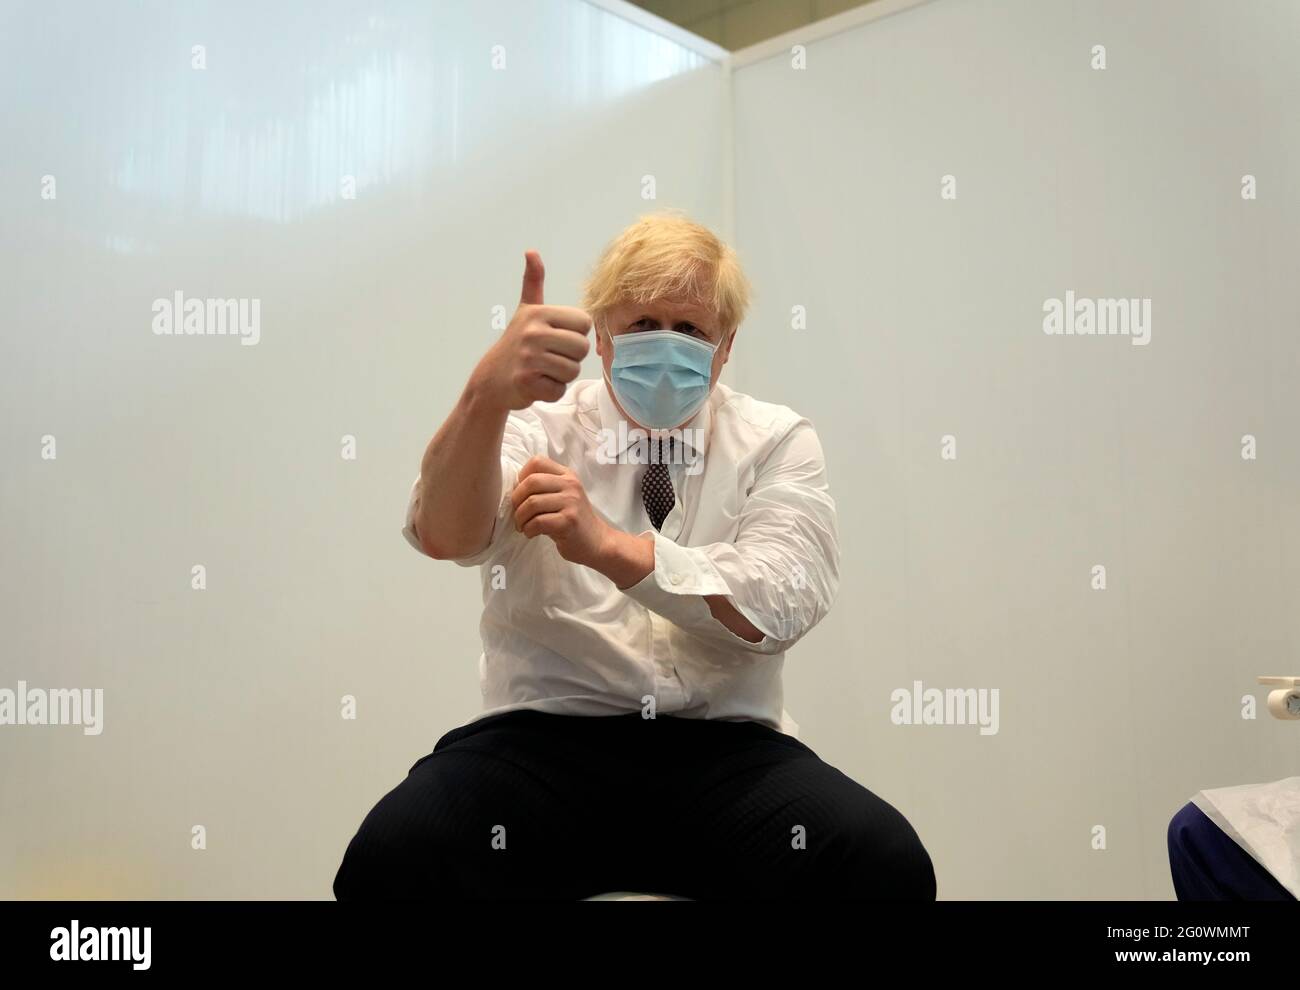 Prime Minister Boris Johnson gives a thumbs up after receiving his second jab of the AstraZeneca coronavirus vaccine, at the Francis Crick Institute in London. Picture date: Thursday June 3, 2021. Stock Photo